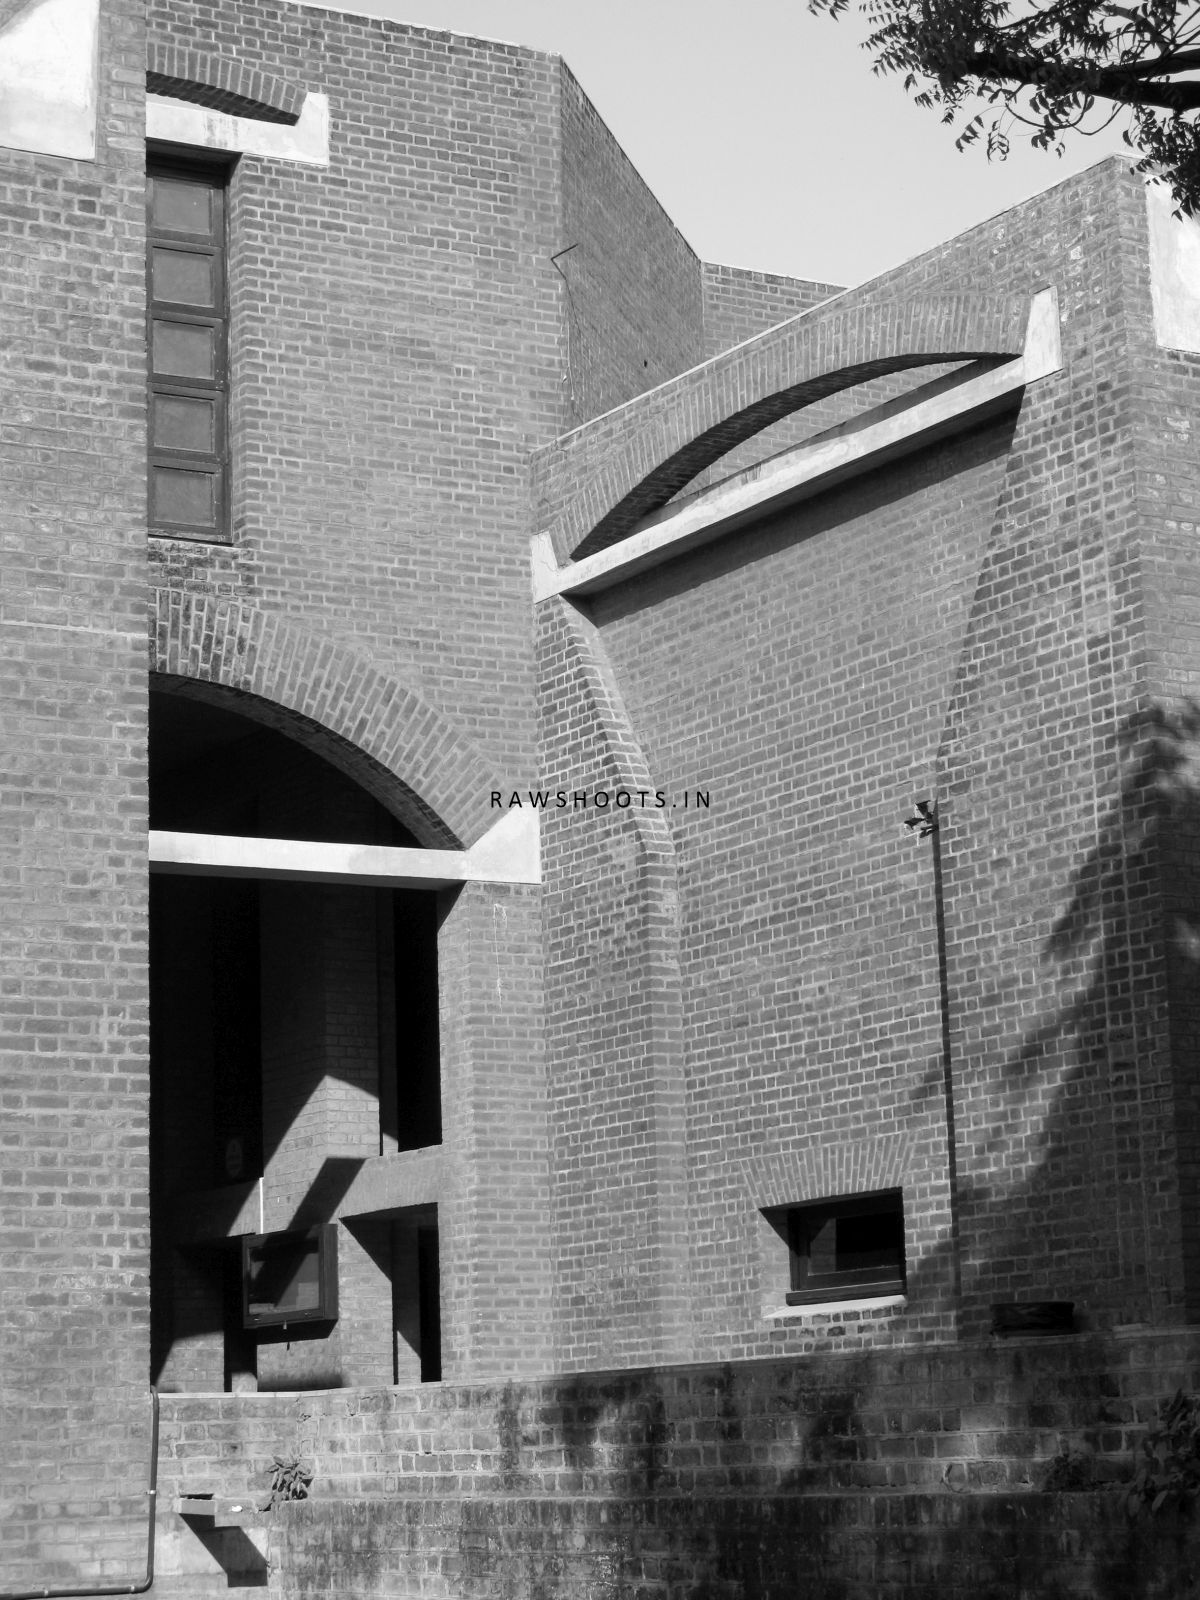 Identity & Continuity, IIM Ahmedabad in pictures, by Madhur Goyal 1